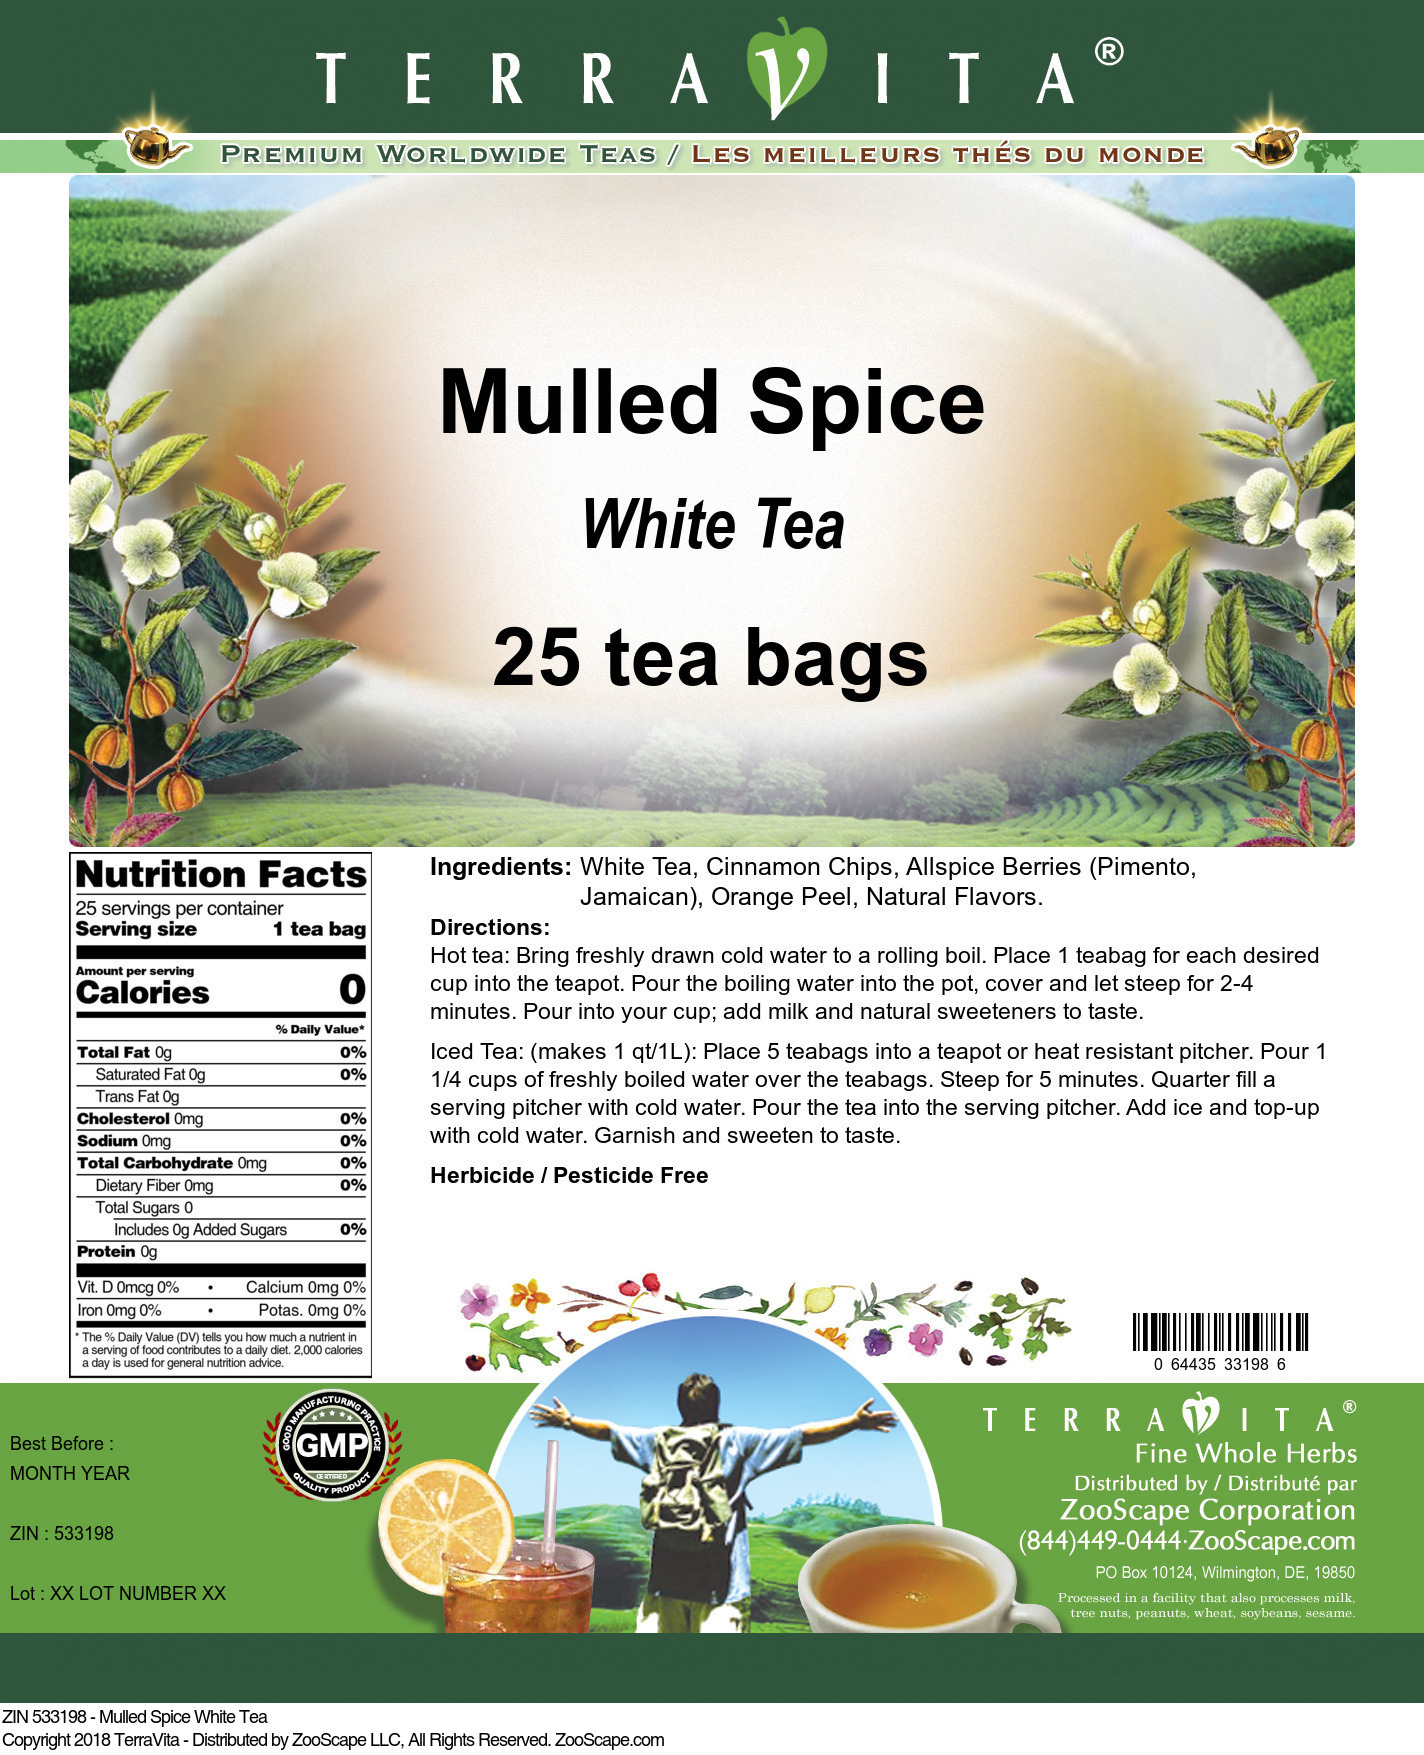 Mulled Spice White Tea - Label